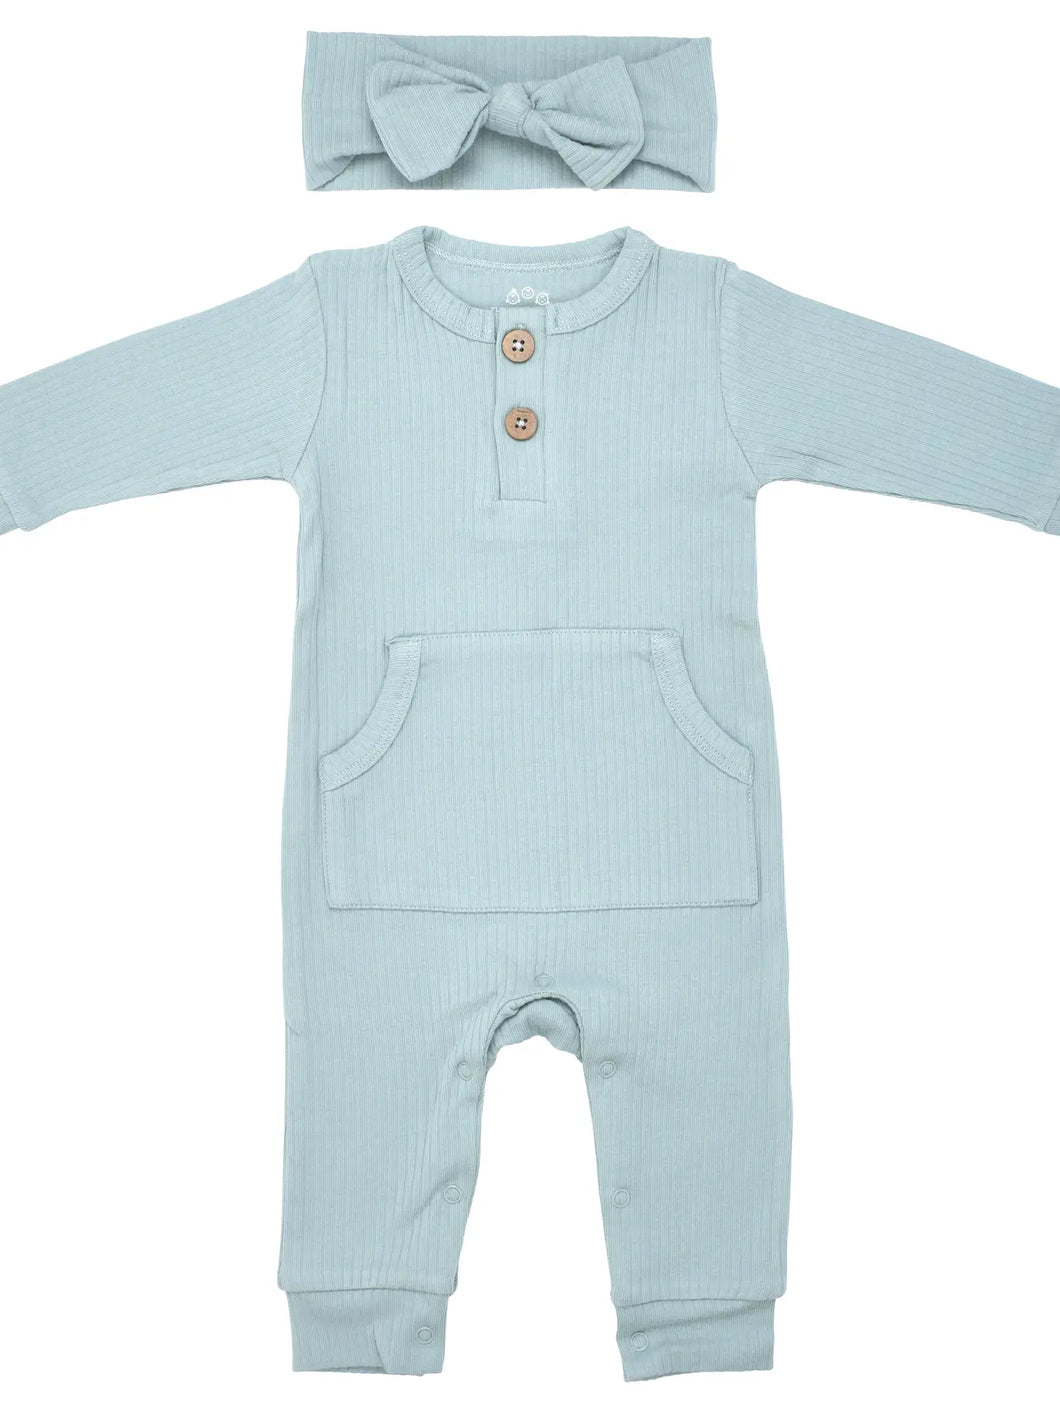 OFF THE GRID RIBBED MINT ONESIE W/ POCKETS [INFANT/TODDLER]